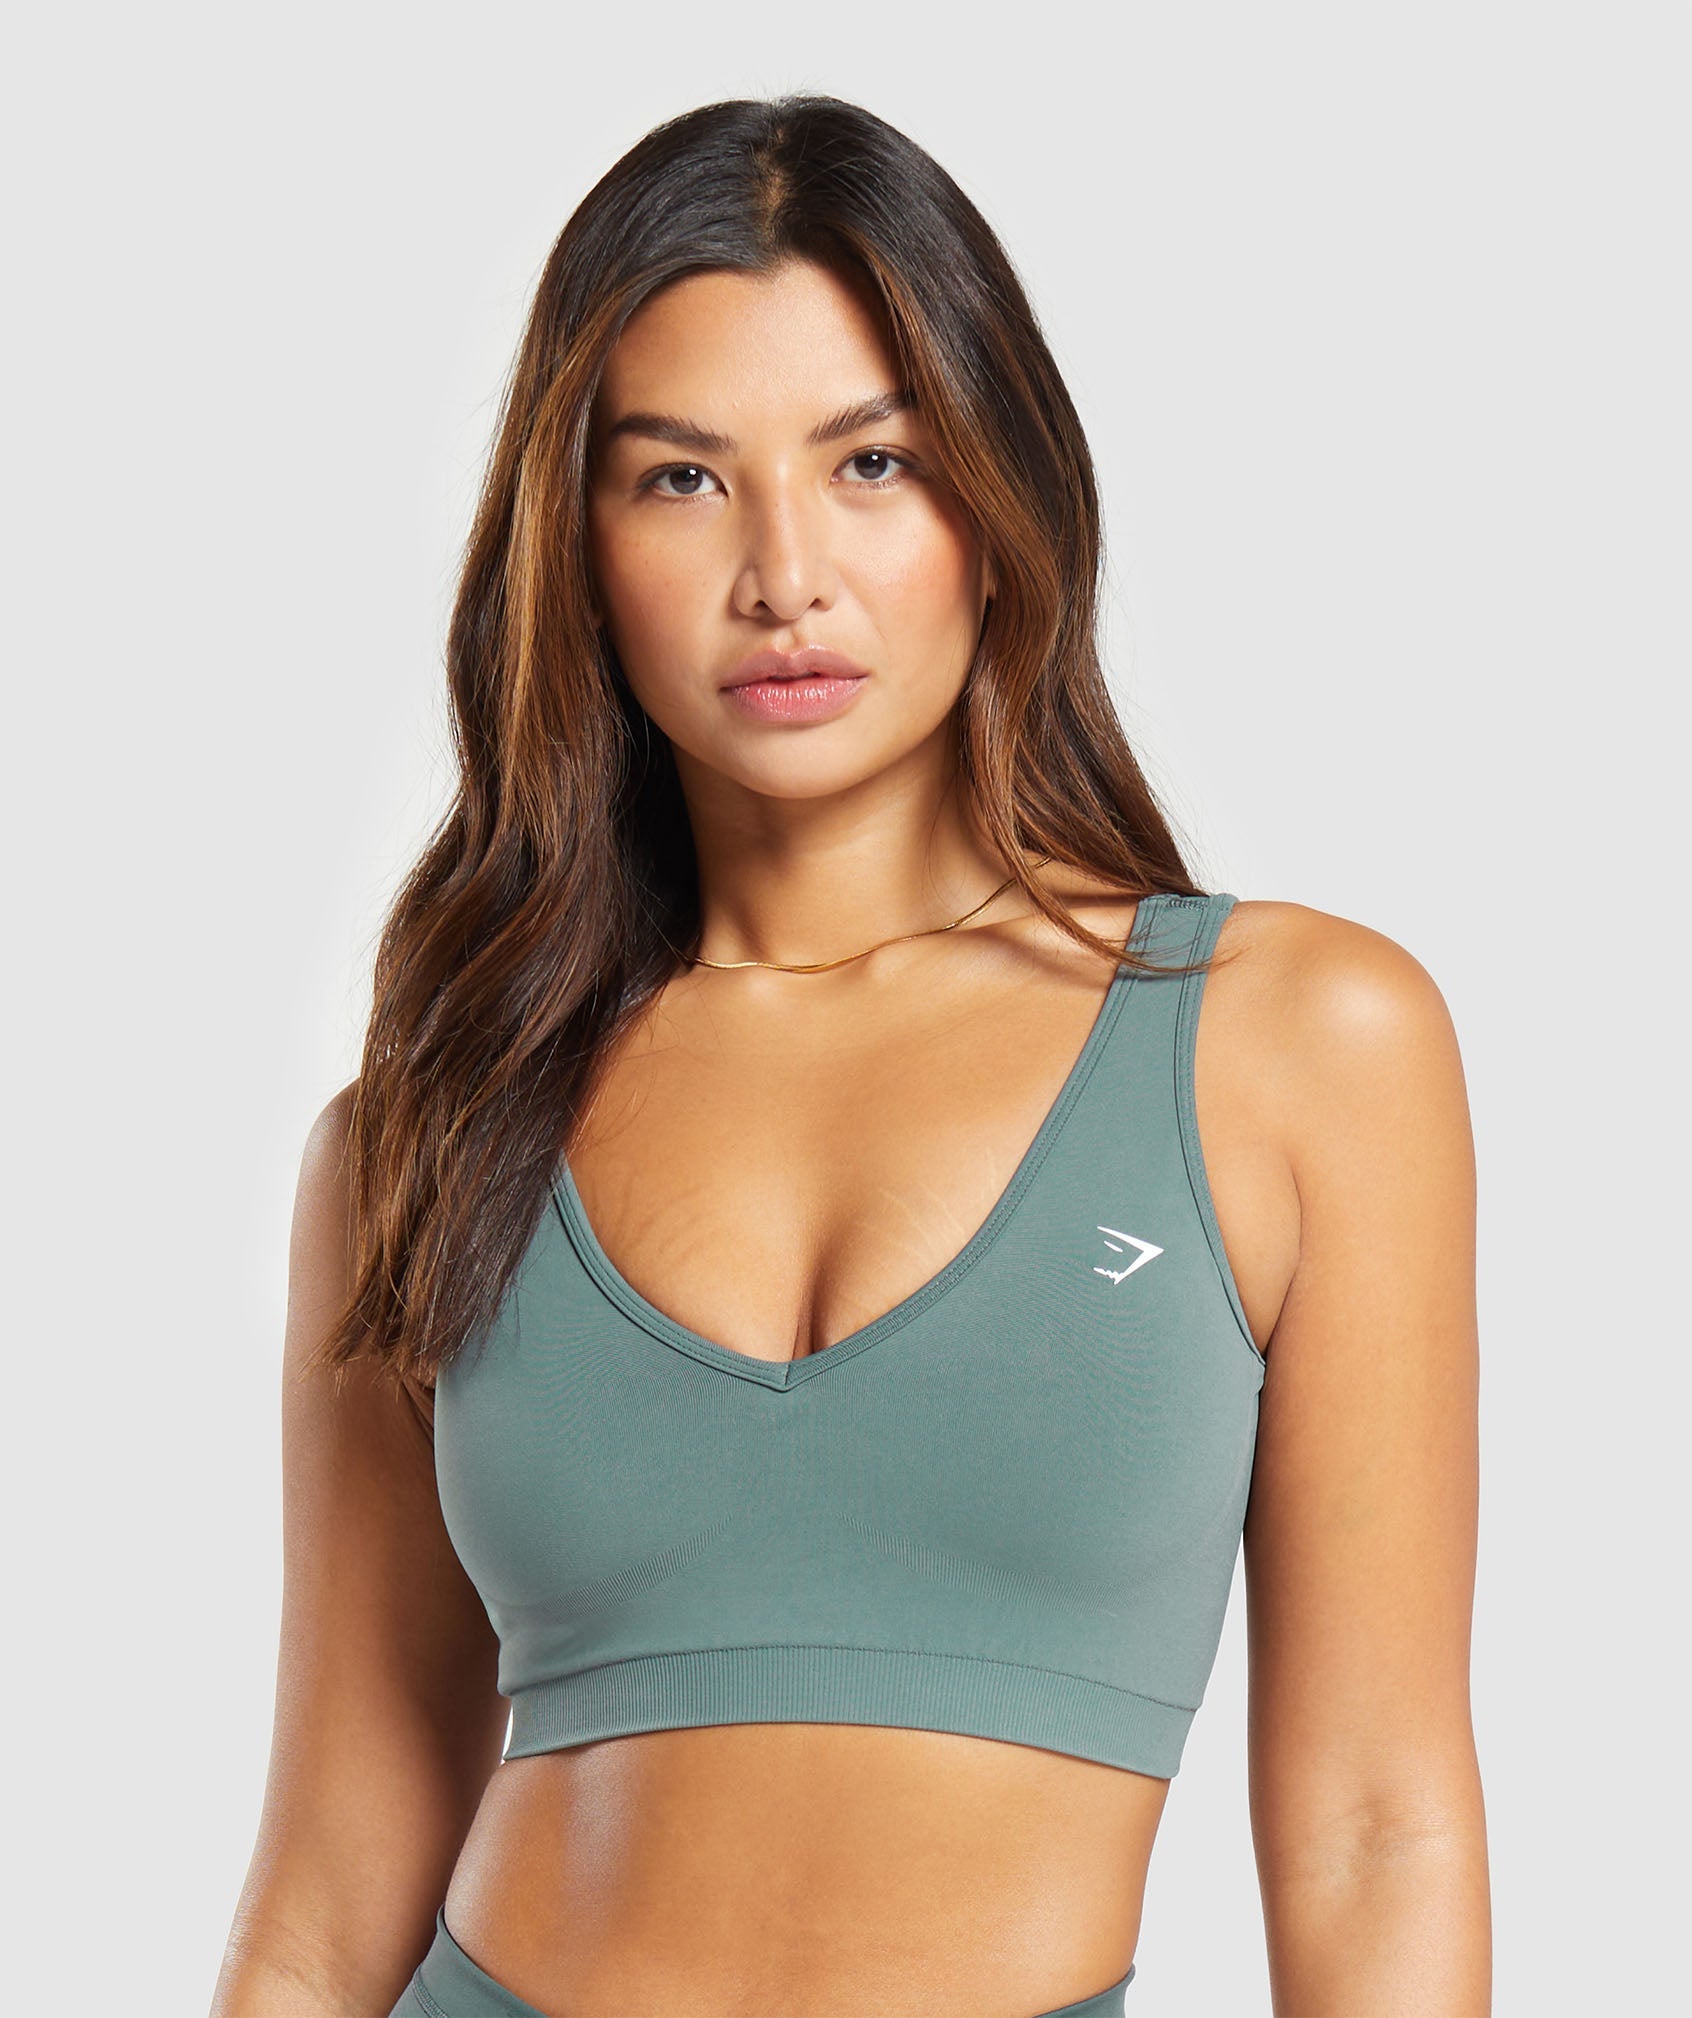 Everyday Seamless Tight Fit Tee